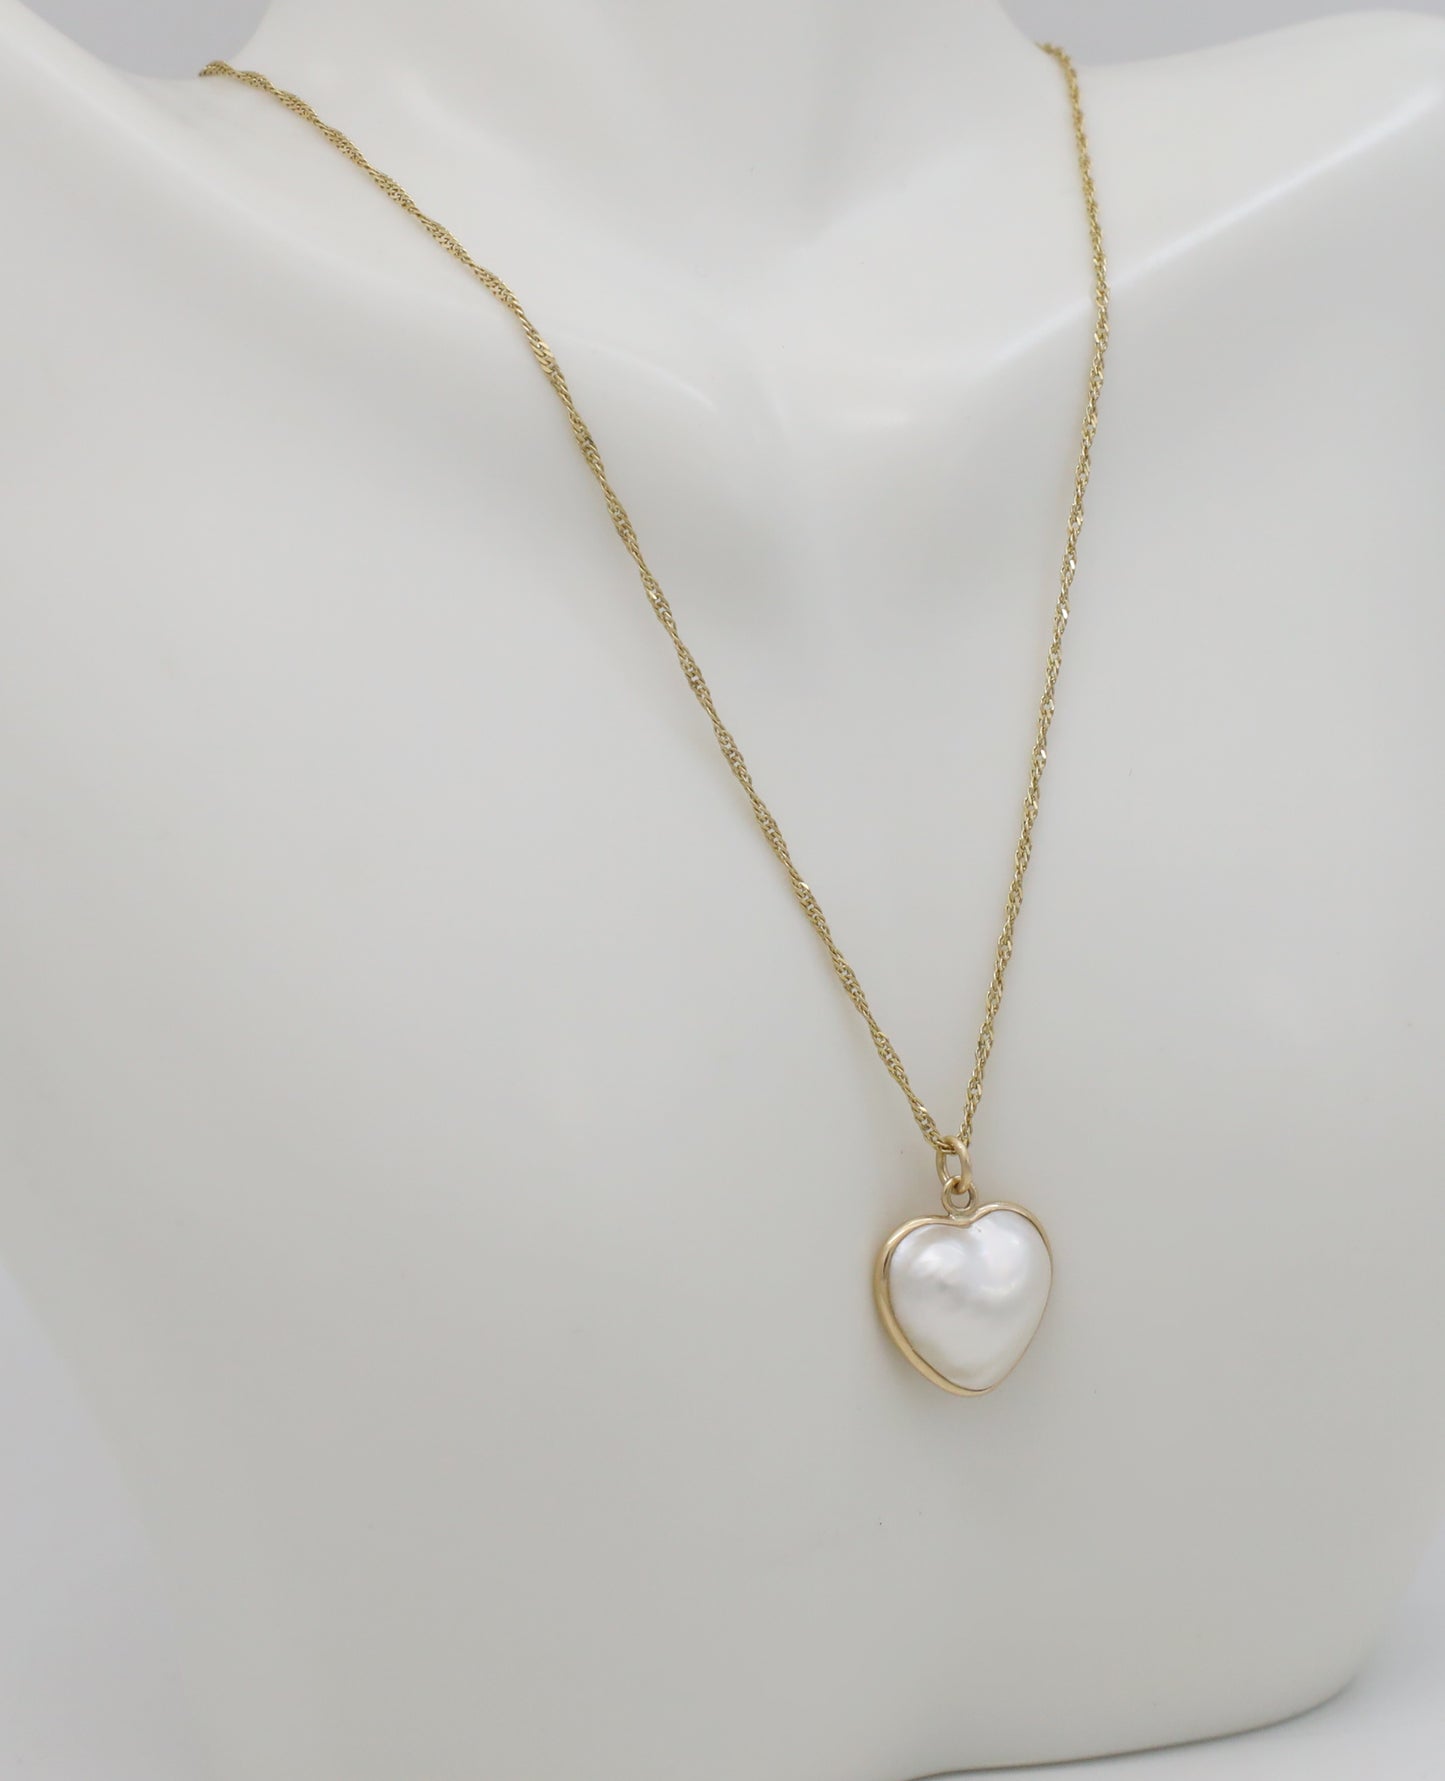 14k Yellow Gold Mother of Pearl Heart Shape Pendant Necklace, 15 inches - 2.6g